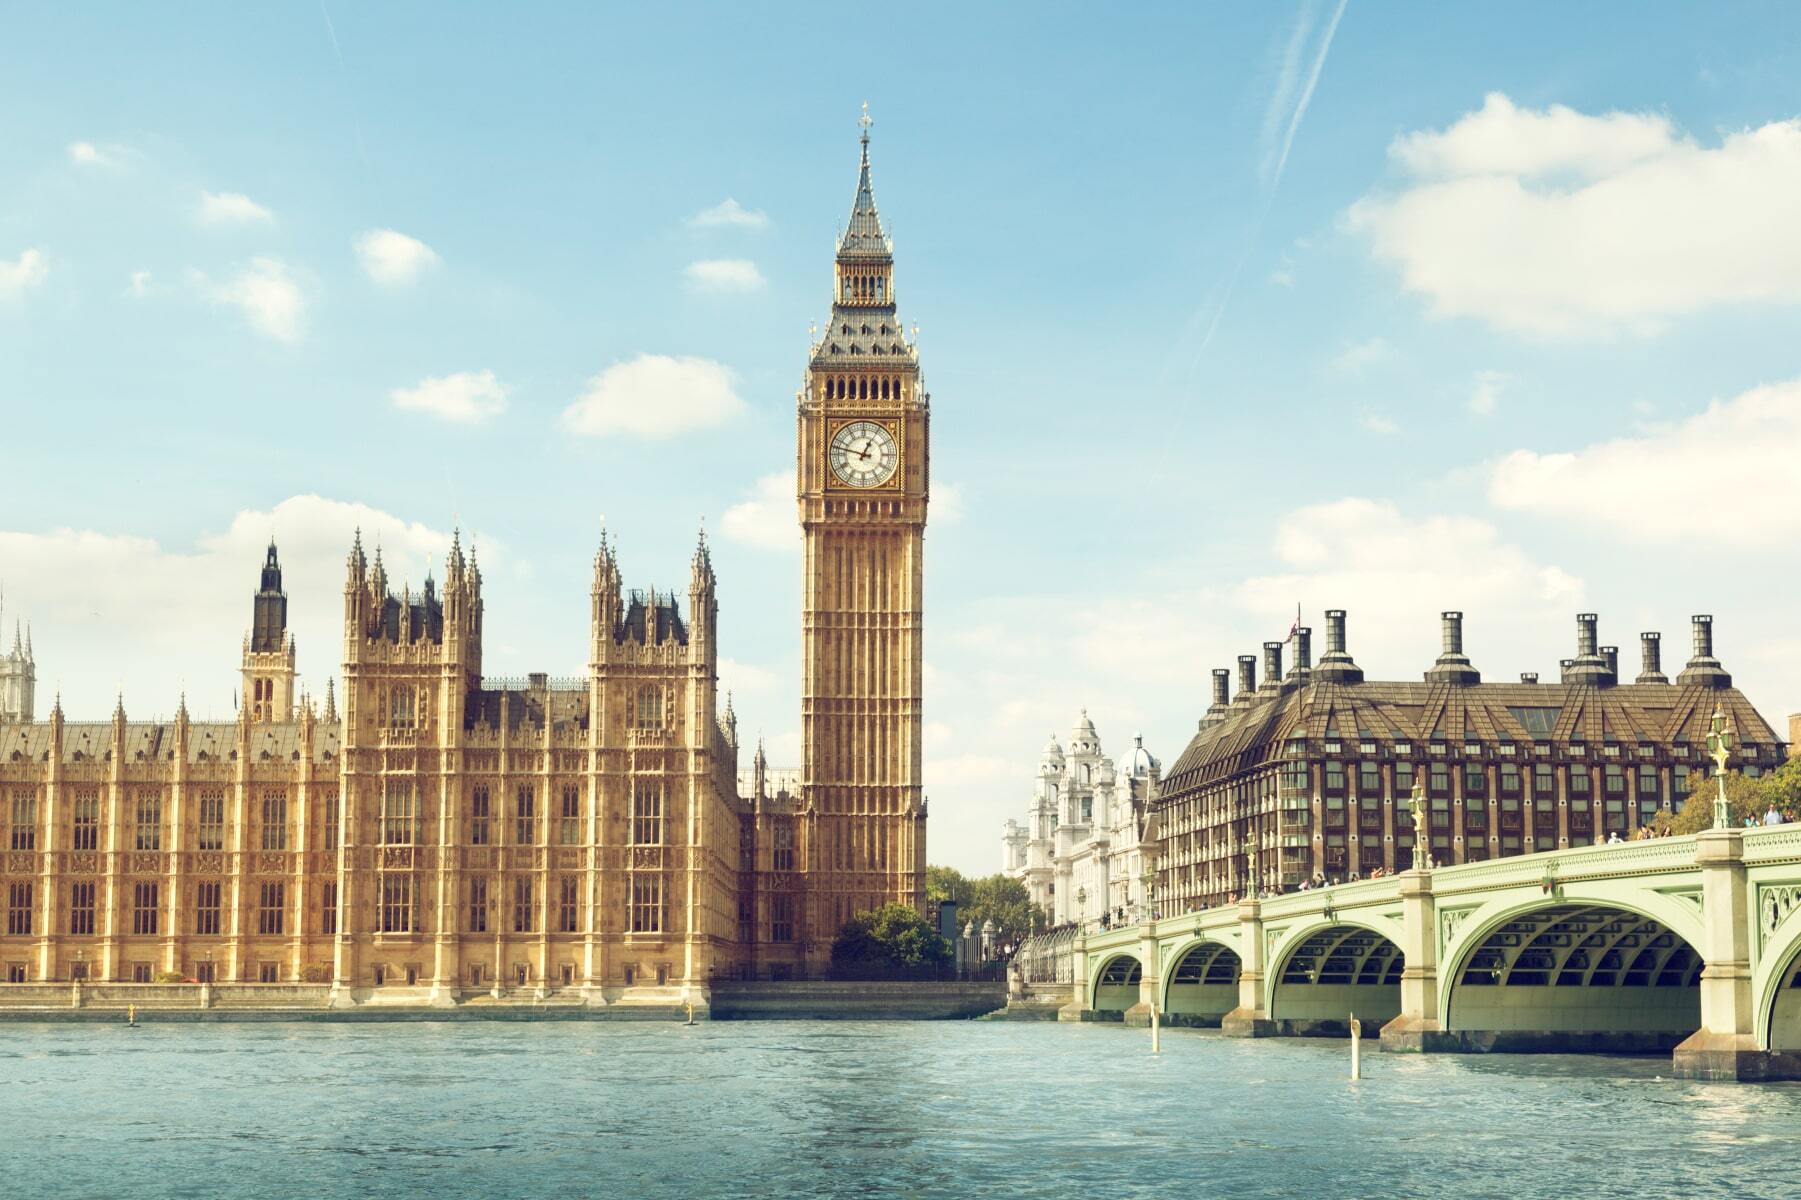 <p><a href="https://www.parliament.uk/about/living-heritage/building/palace/big-ben/facts-figures/" class="atom_link atom_valid" rel="noreferrer noopener">Big Ben</a> is the most famous clock in the world, and after many years of renovations, we can now admire it in all its glory. Sounding across the streets of London since 1859, the bell inside the Elizabeth Tower weighs more than 13 tons.</p>